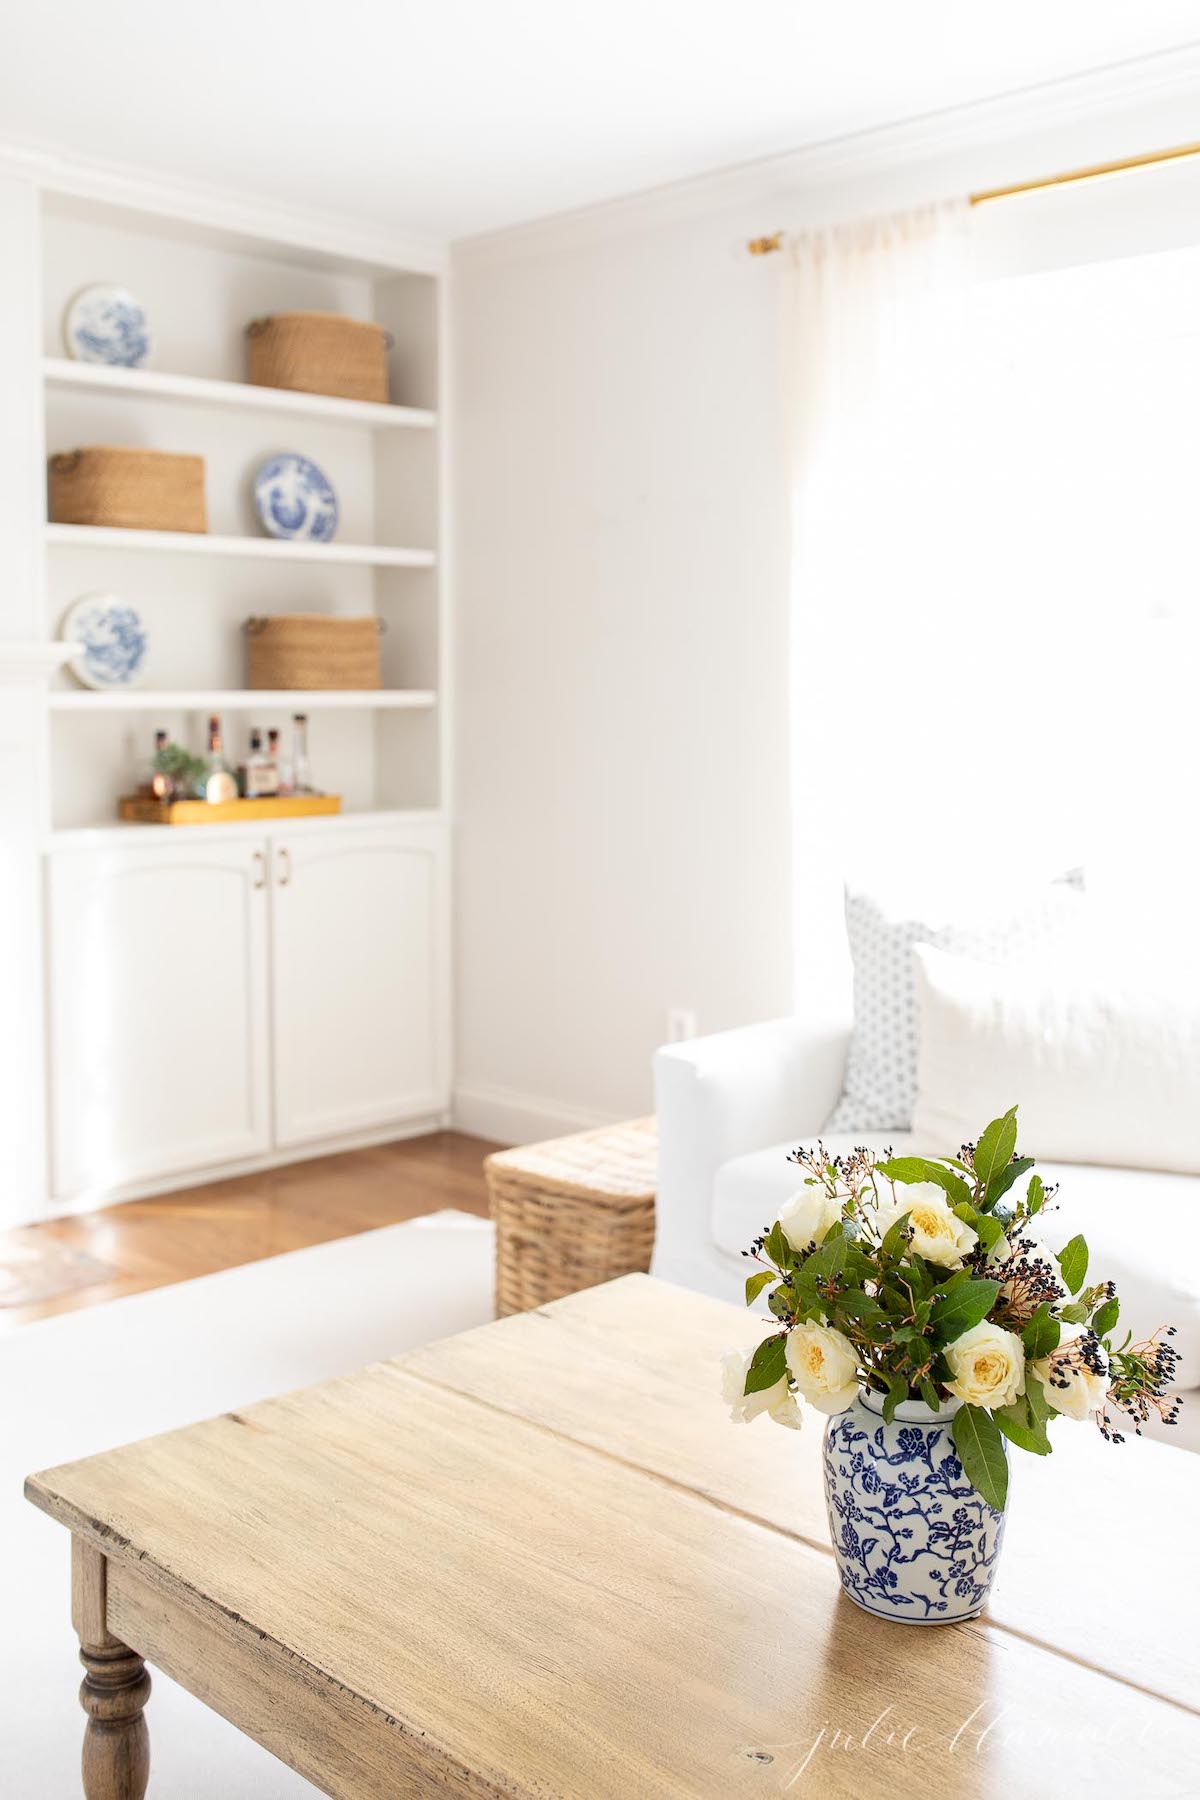 A living room with white furniture and a blue vase.